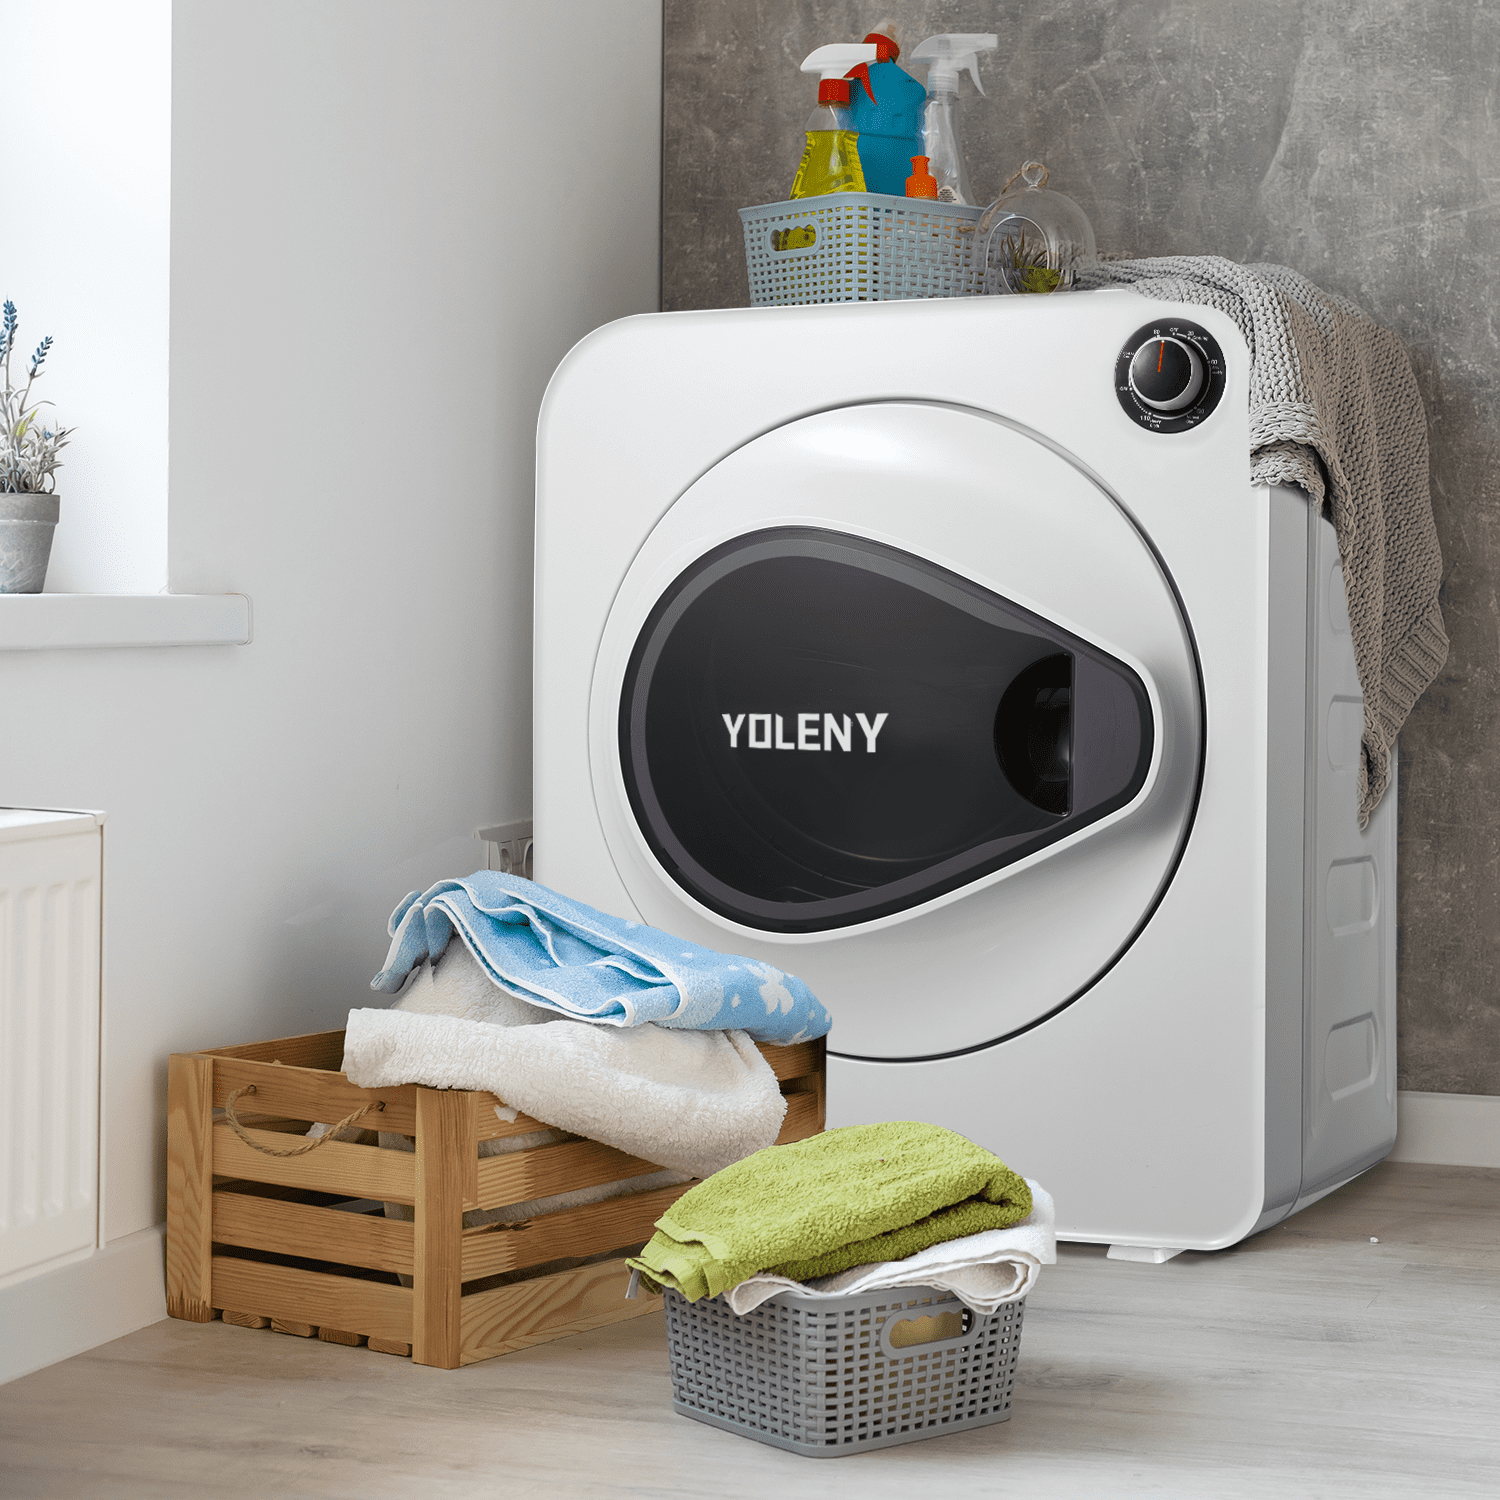 Yoleny Electric Compact Laundry Dryer, 13.2 lbs Load Stainless Steel Portable Dryer with Exhaust Pipe, Clothes Dryer for Apartments, White